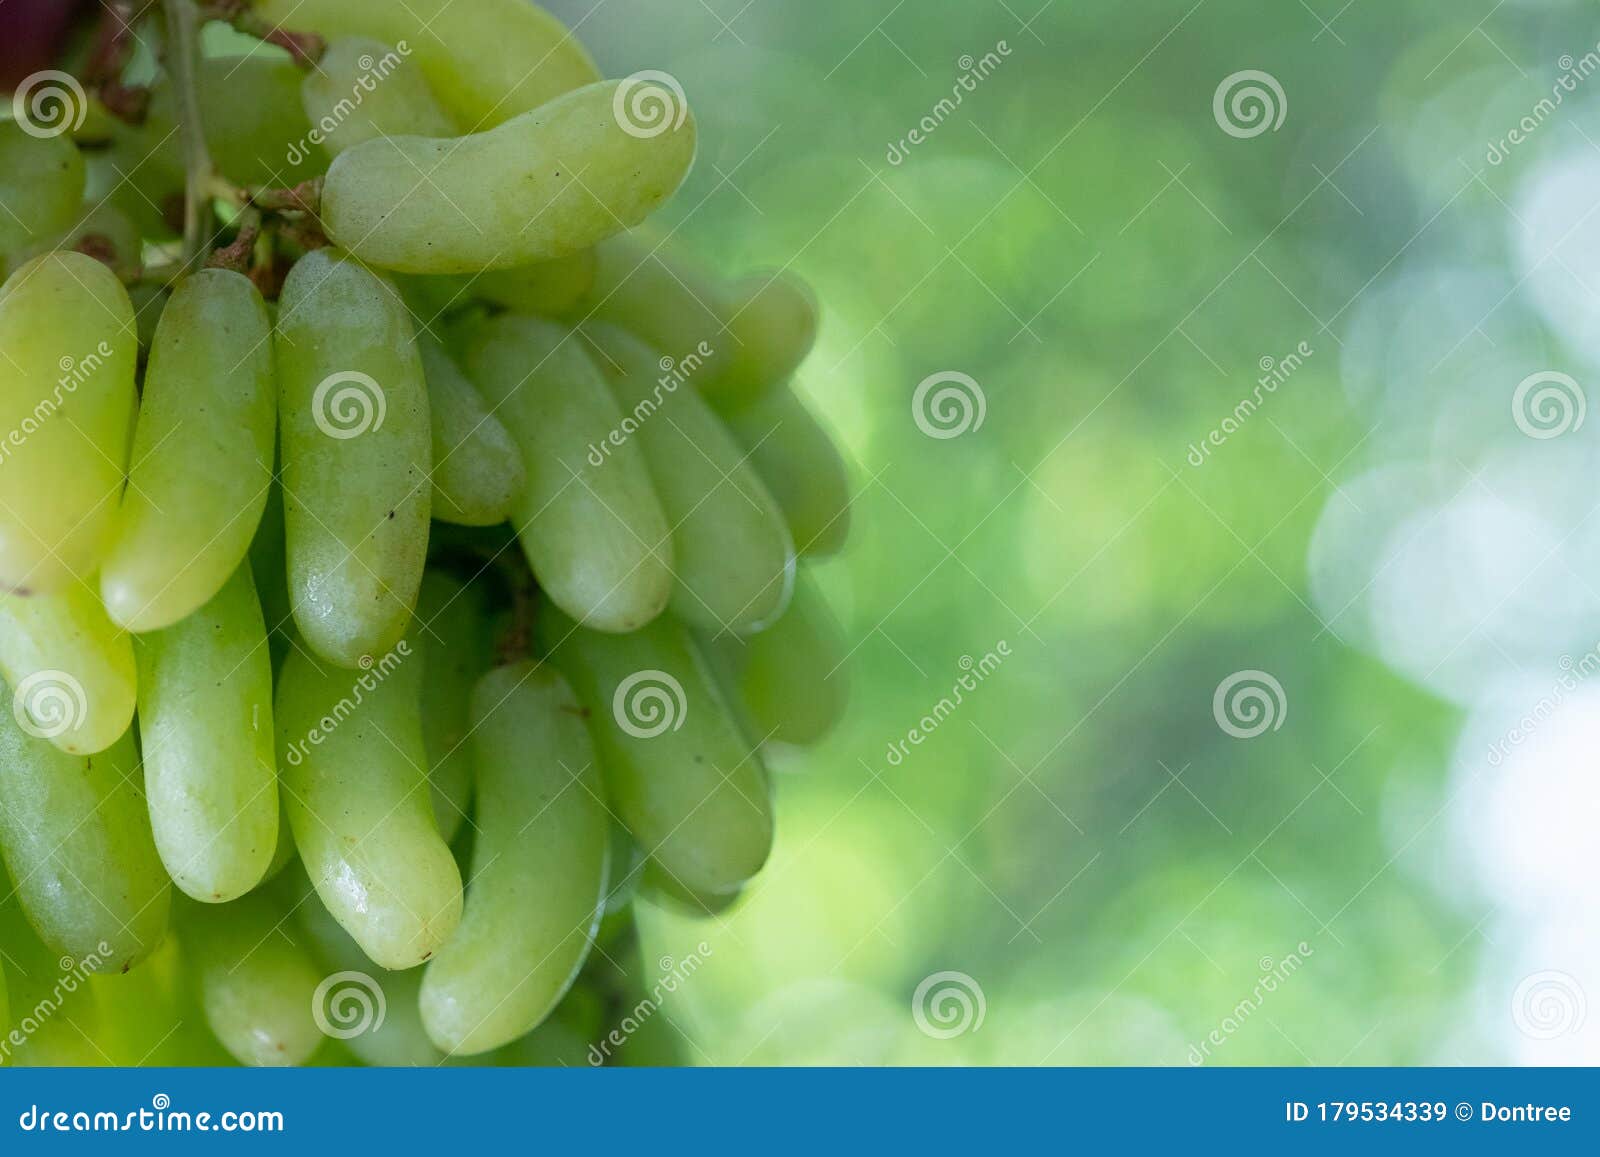 https://thumbs.dreamstime.com/z/bunch-healthy-delicious-green-grapes-seeds-fresh-179534339.jpg